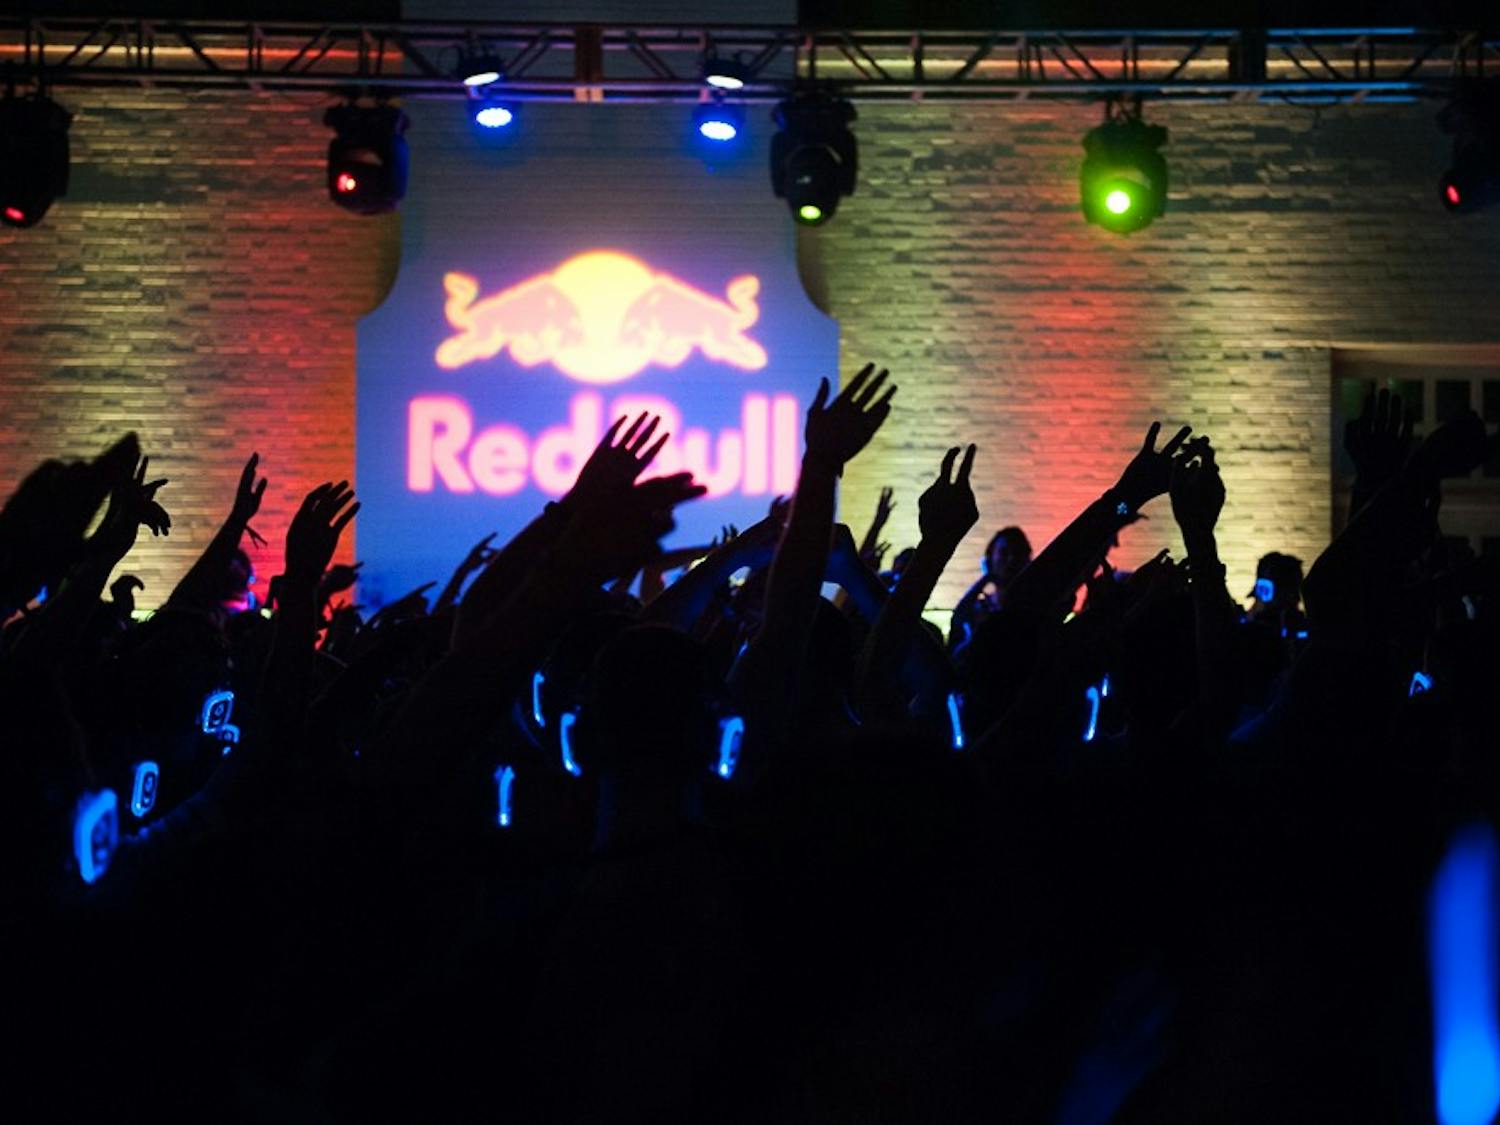 Party Favor and Red Bull bring rave to ASU's Secret Garden